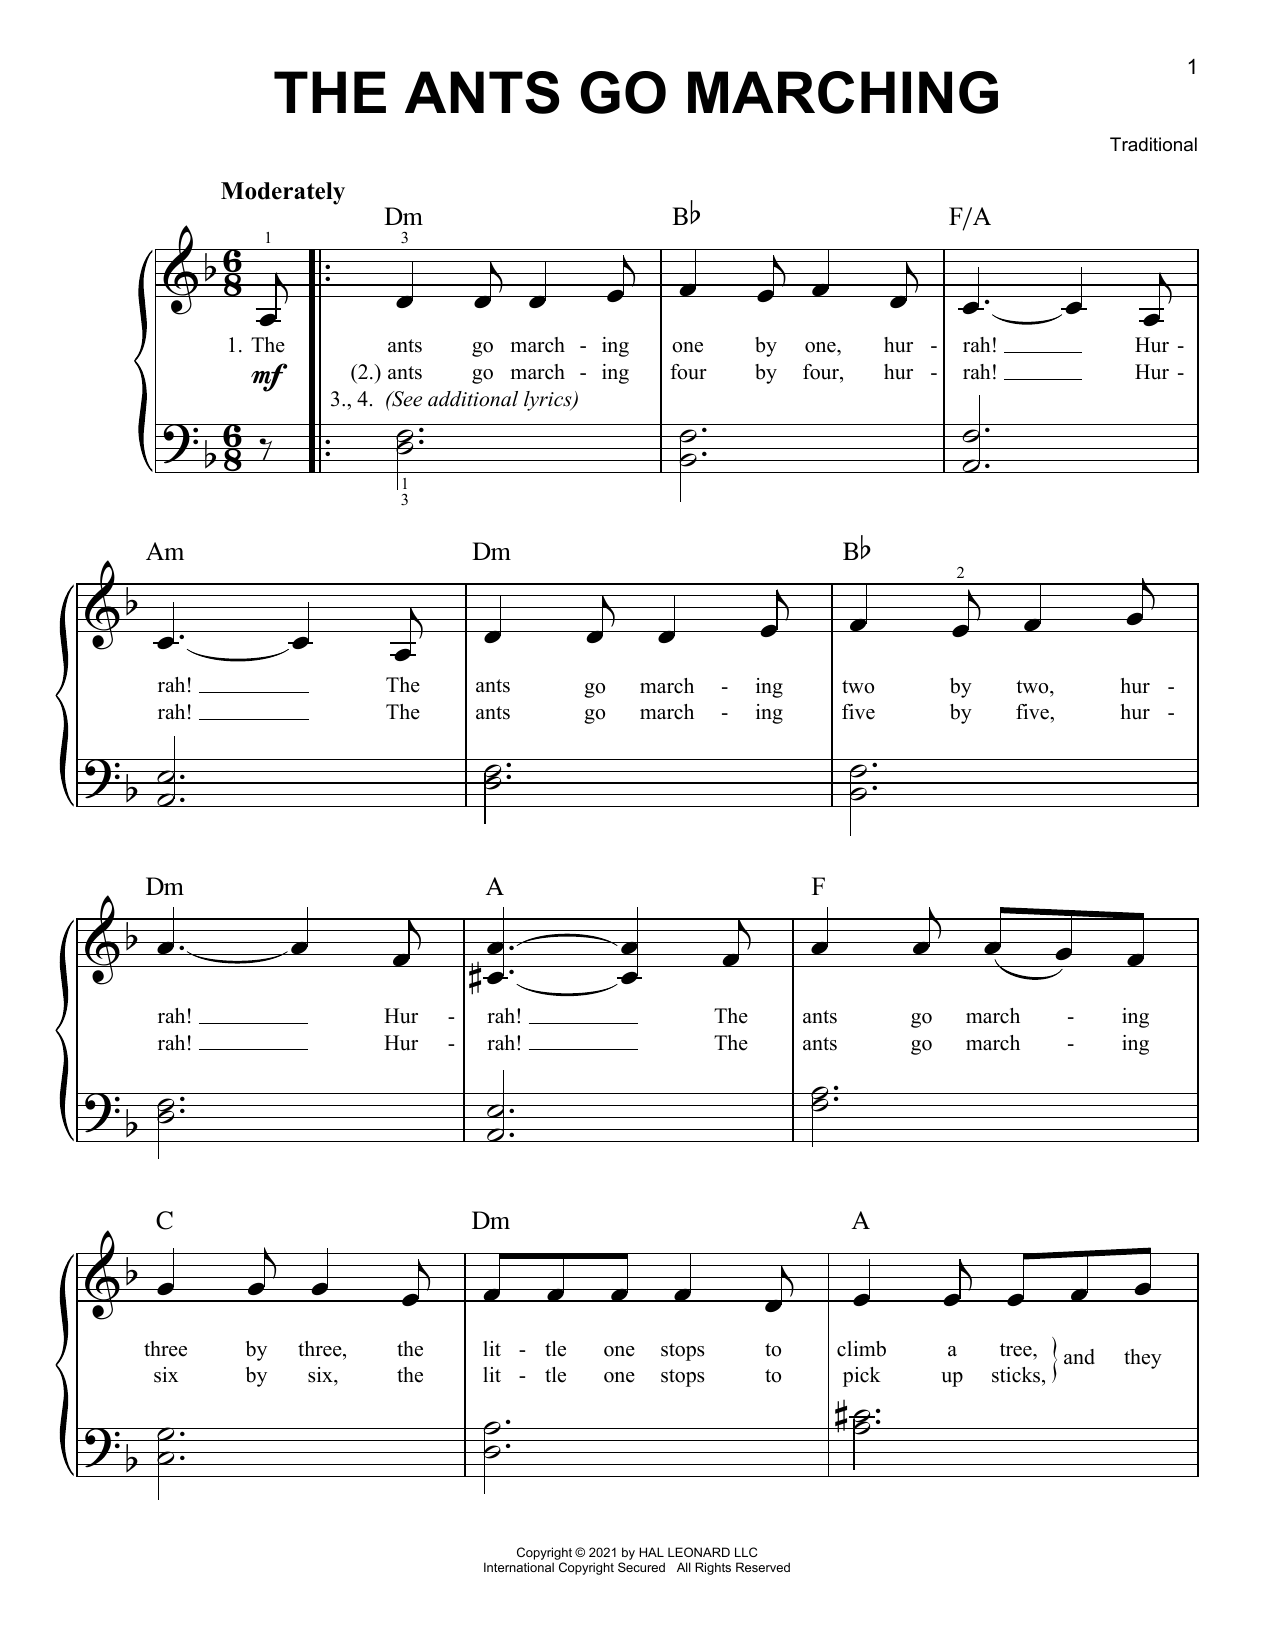 Download Traditional The Ants Go Marching Sheet Music